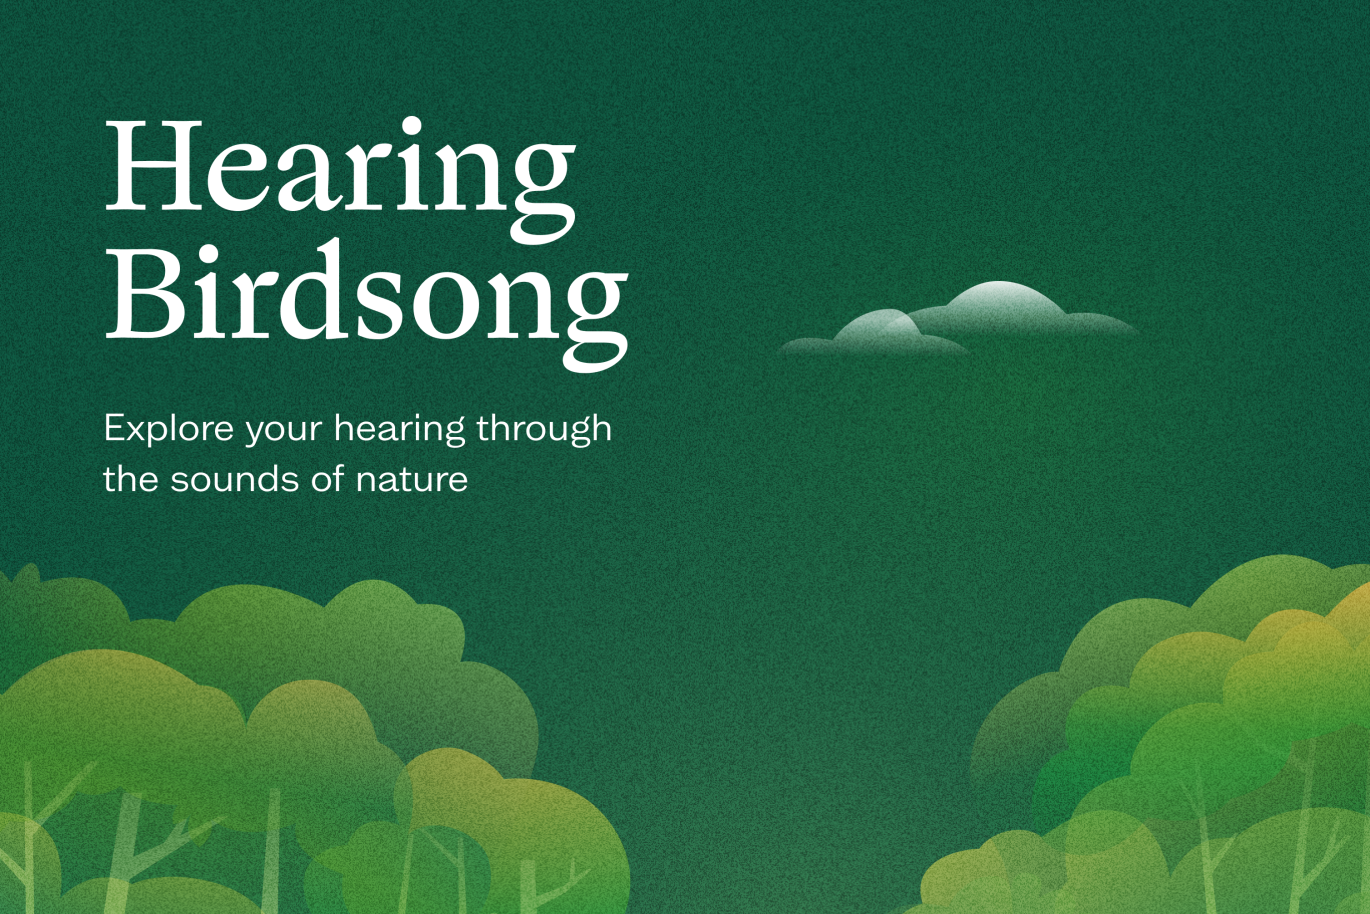 Humanising hearing tests, using the sound of birdsong